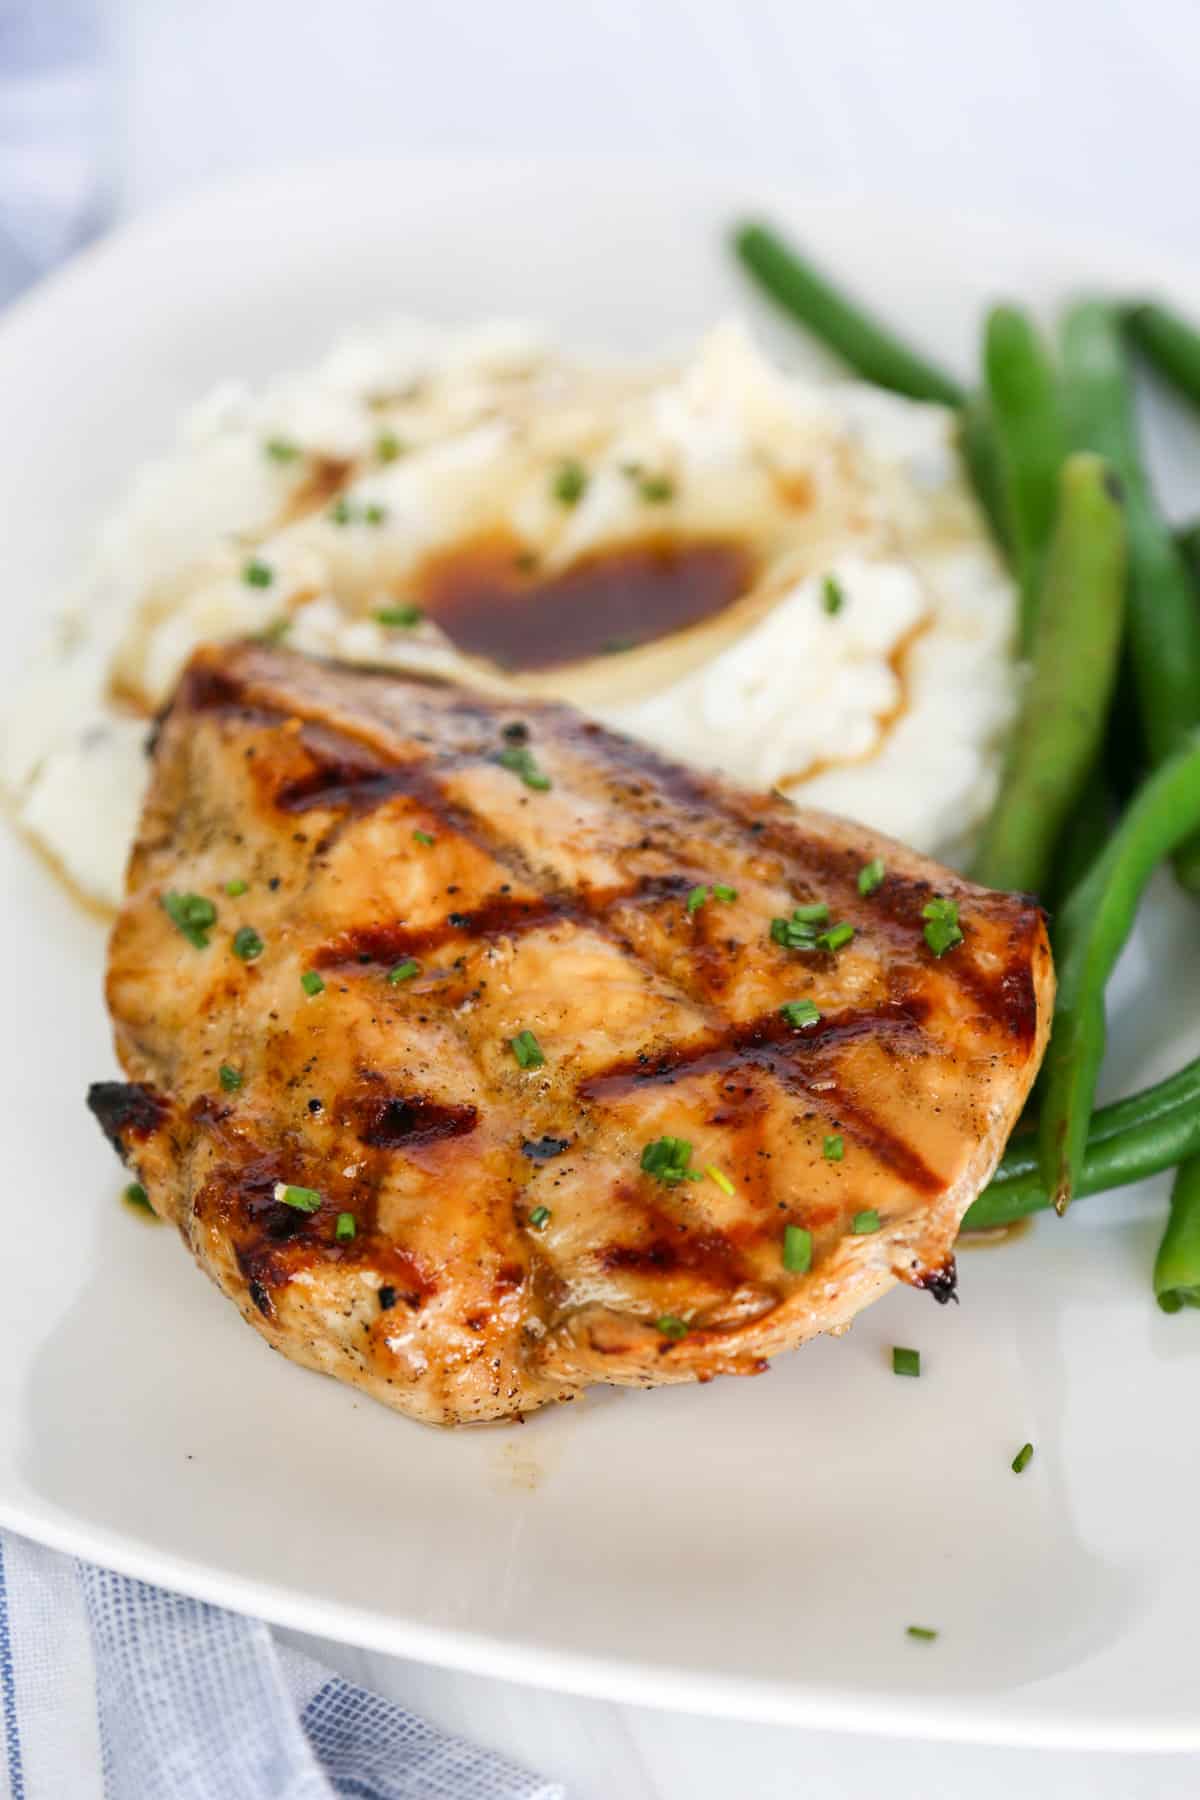 Grilled savory chicken breast with mashed potatoes and gravy and green beans on a plate.